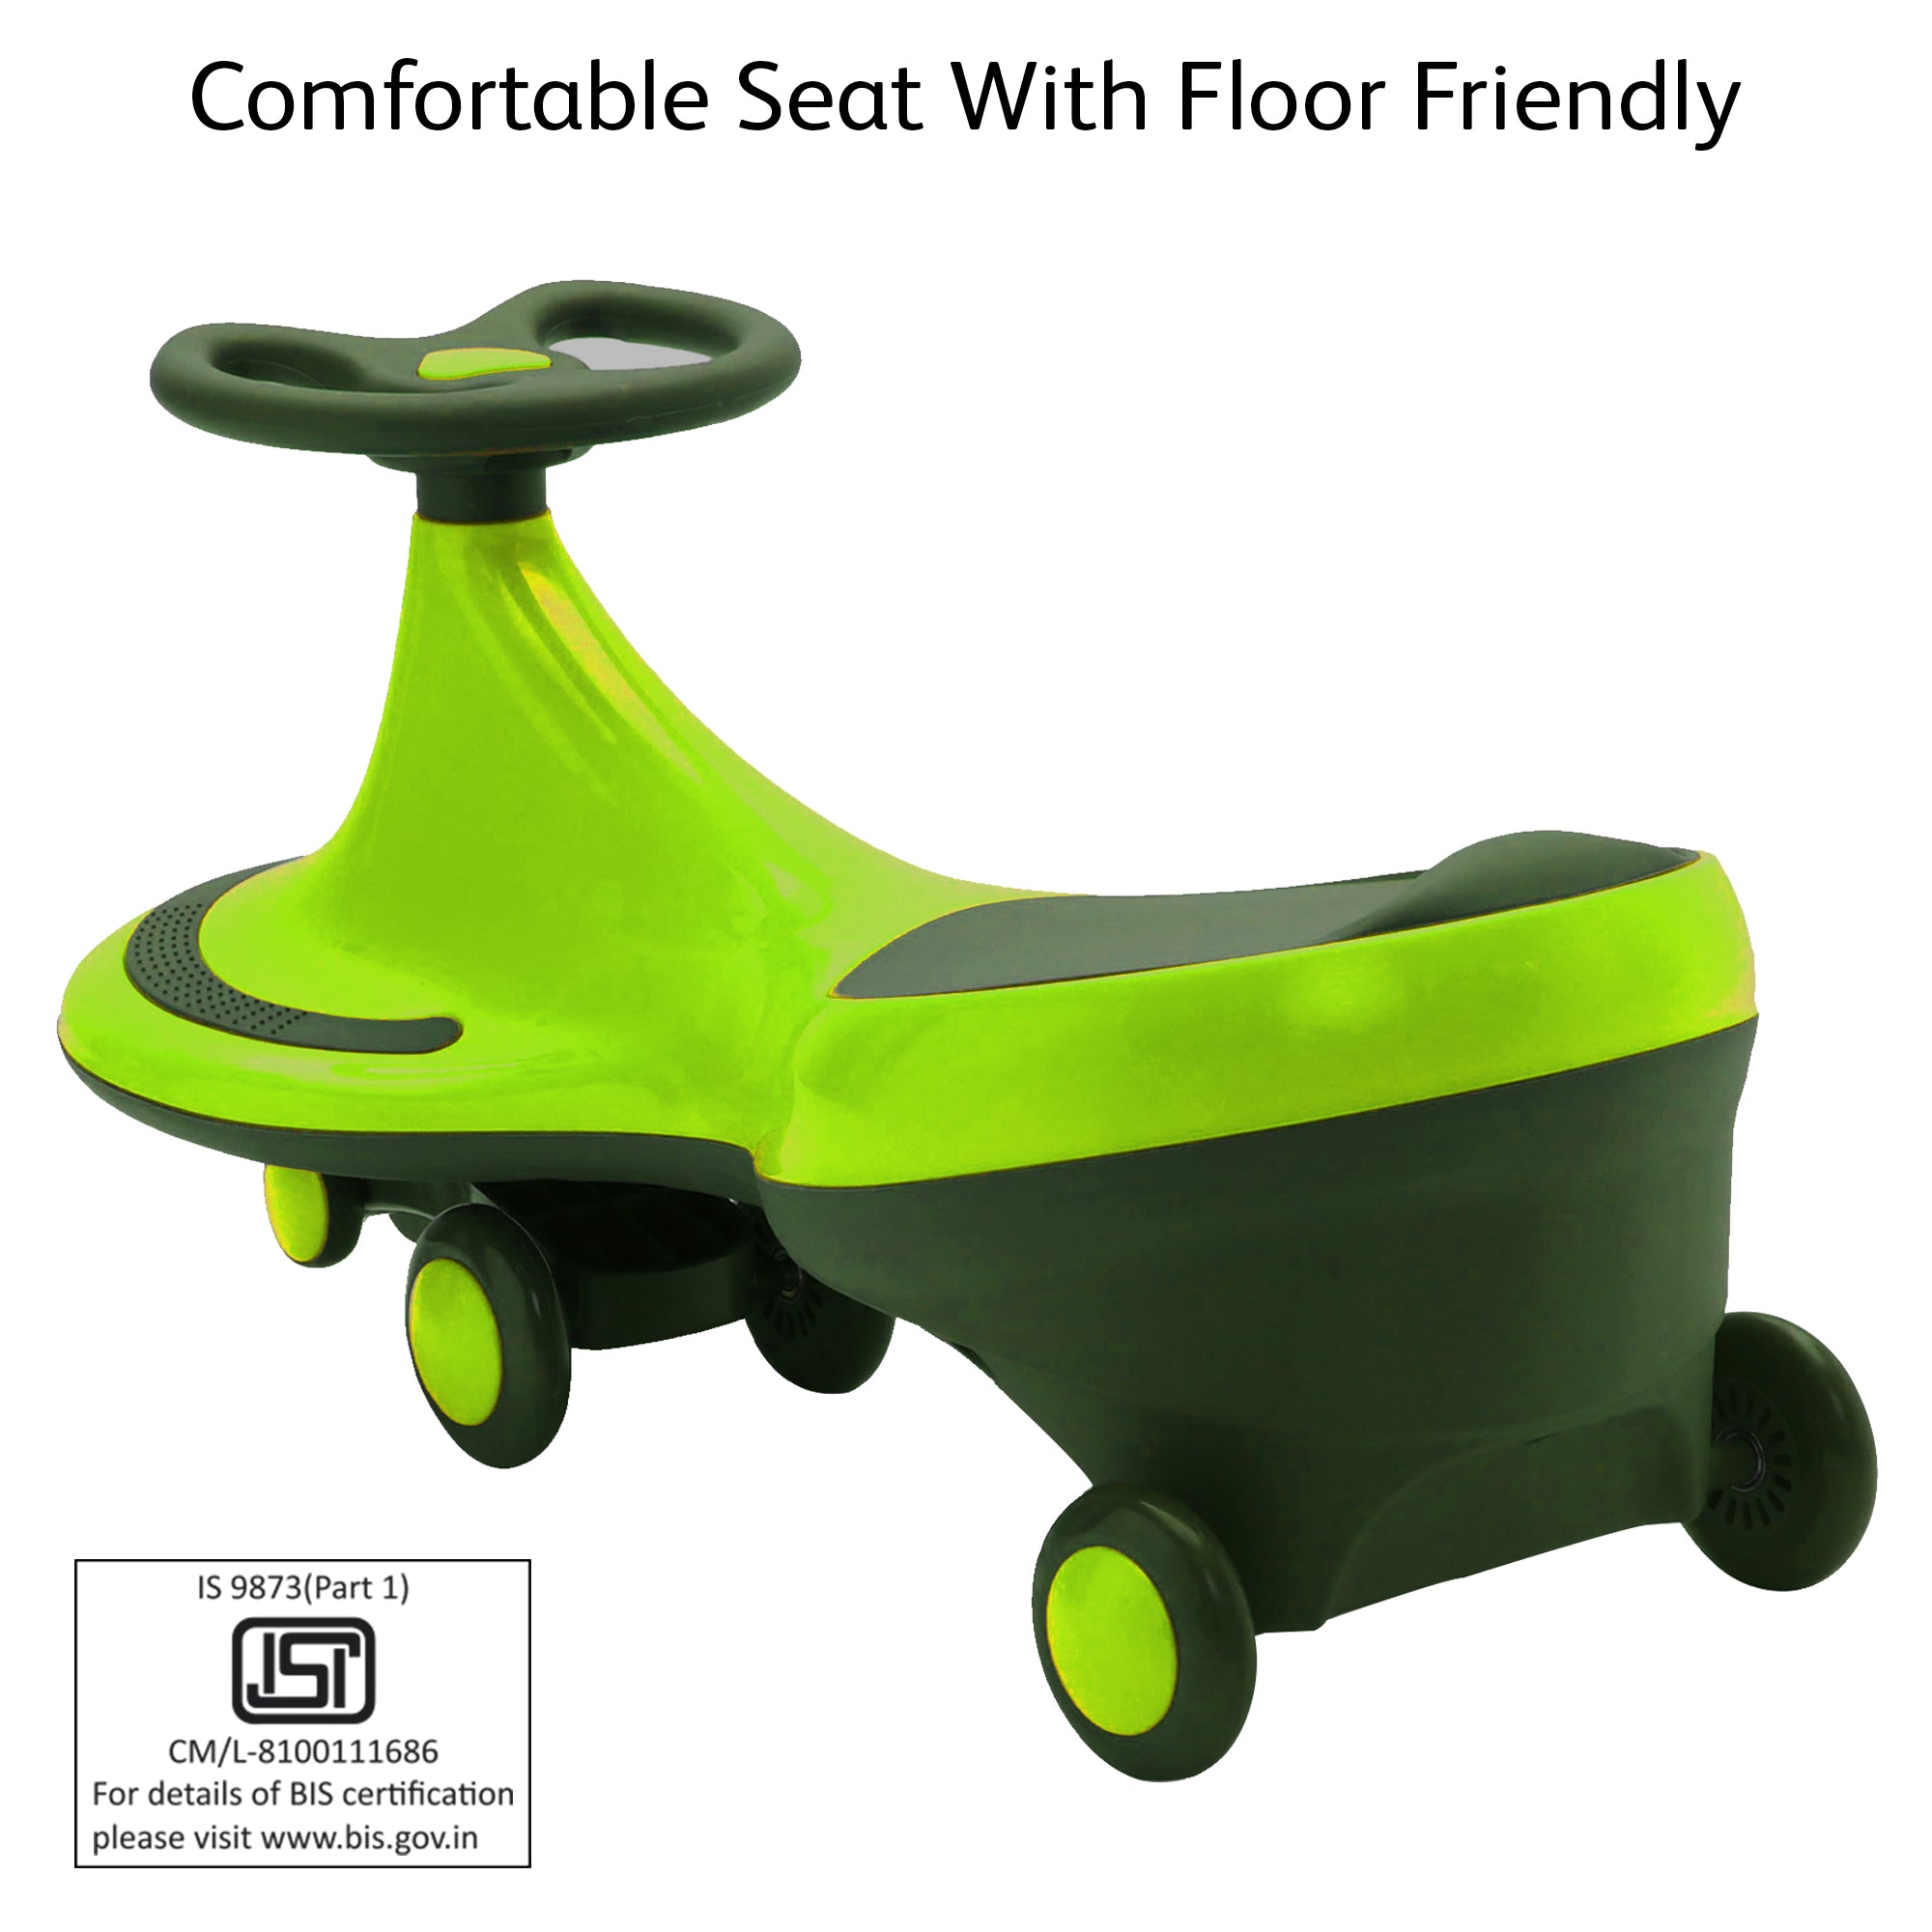 Tygatec Ride On Swing Car for Kids ( Green Color )